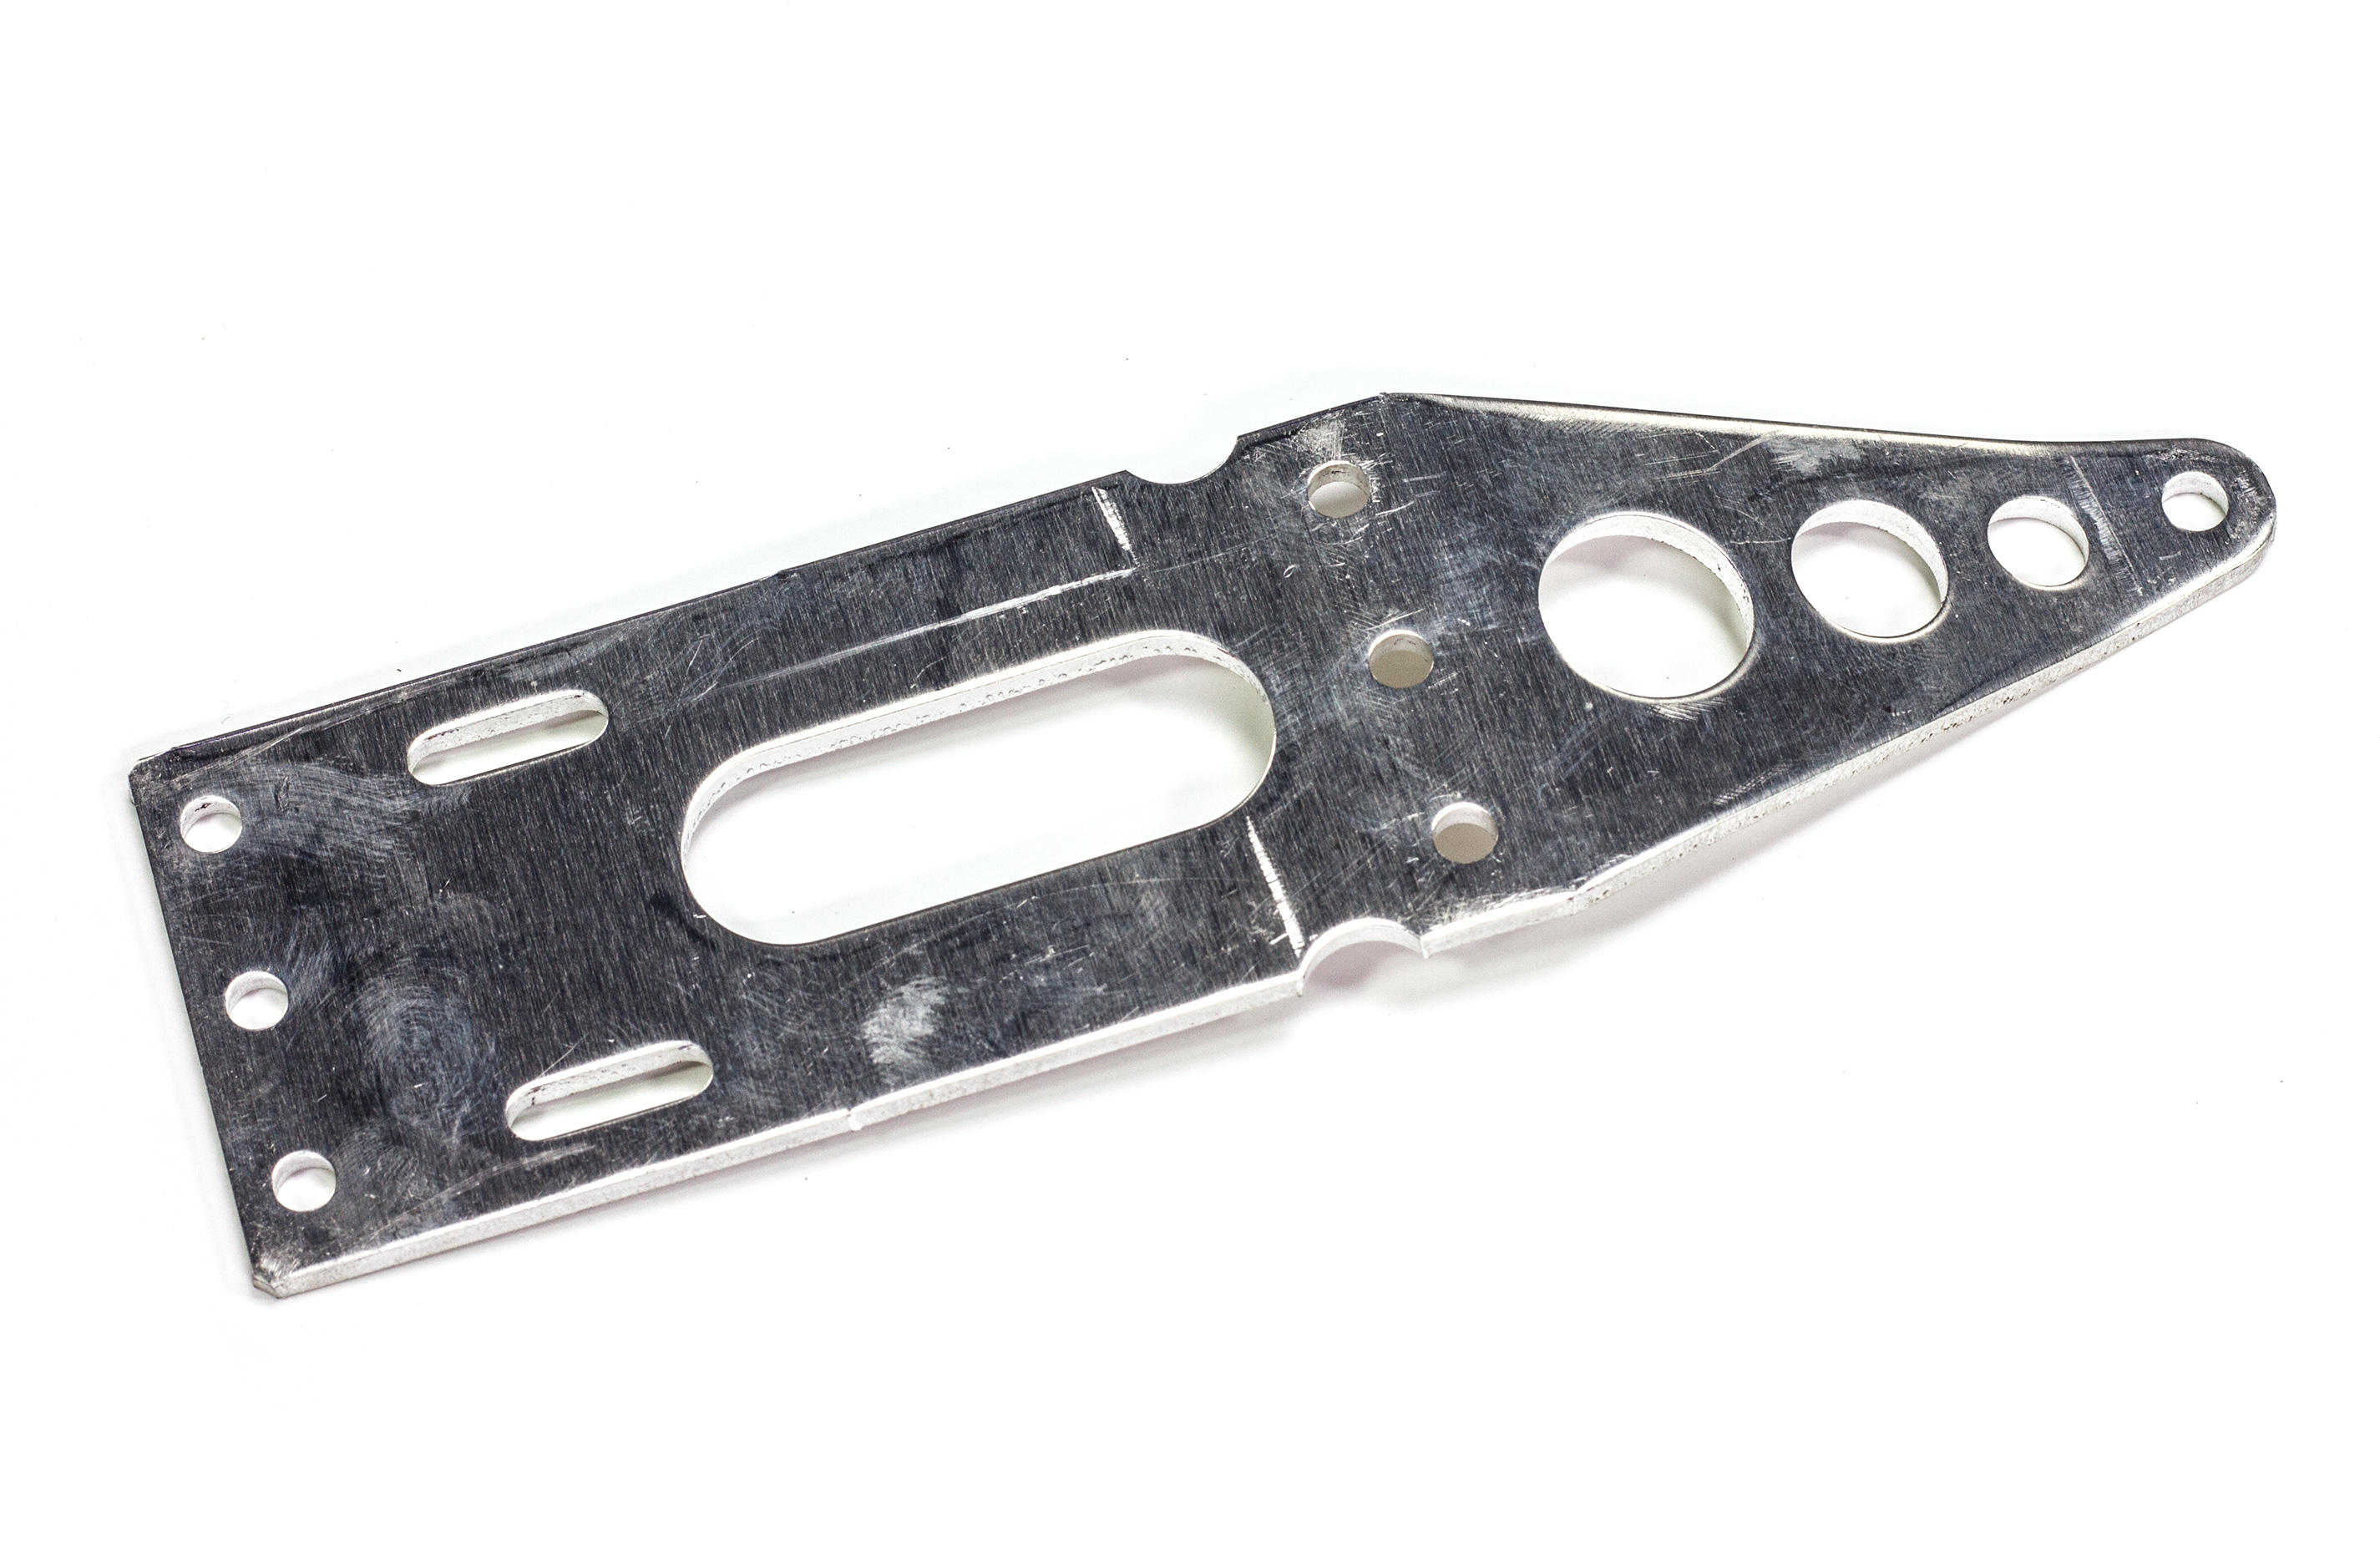 6261 FG Alloy plate for front axle Leopard - 1pce.